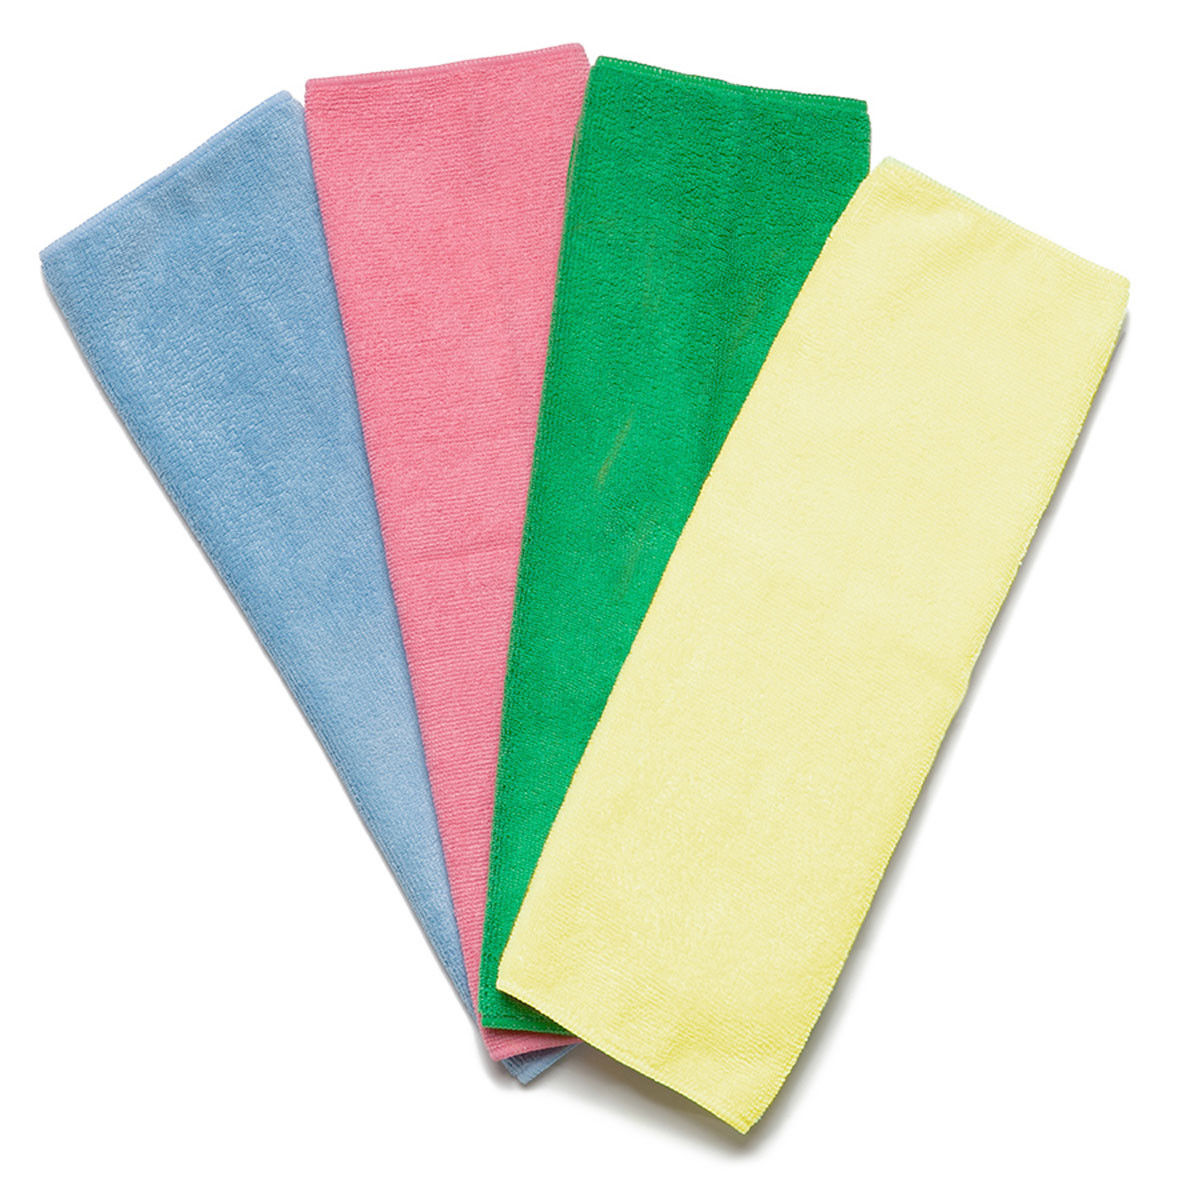 What makes this microfiber towels ideal for cleaning?